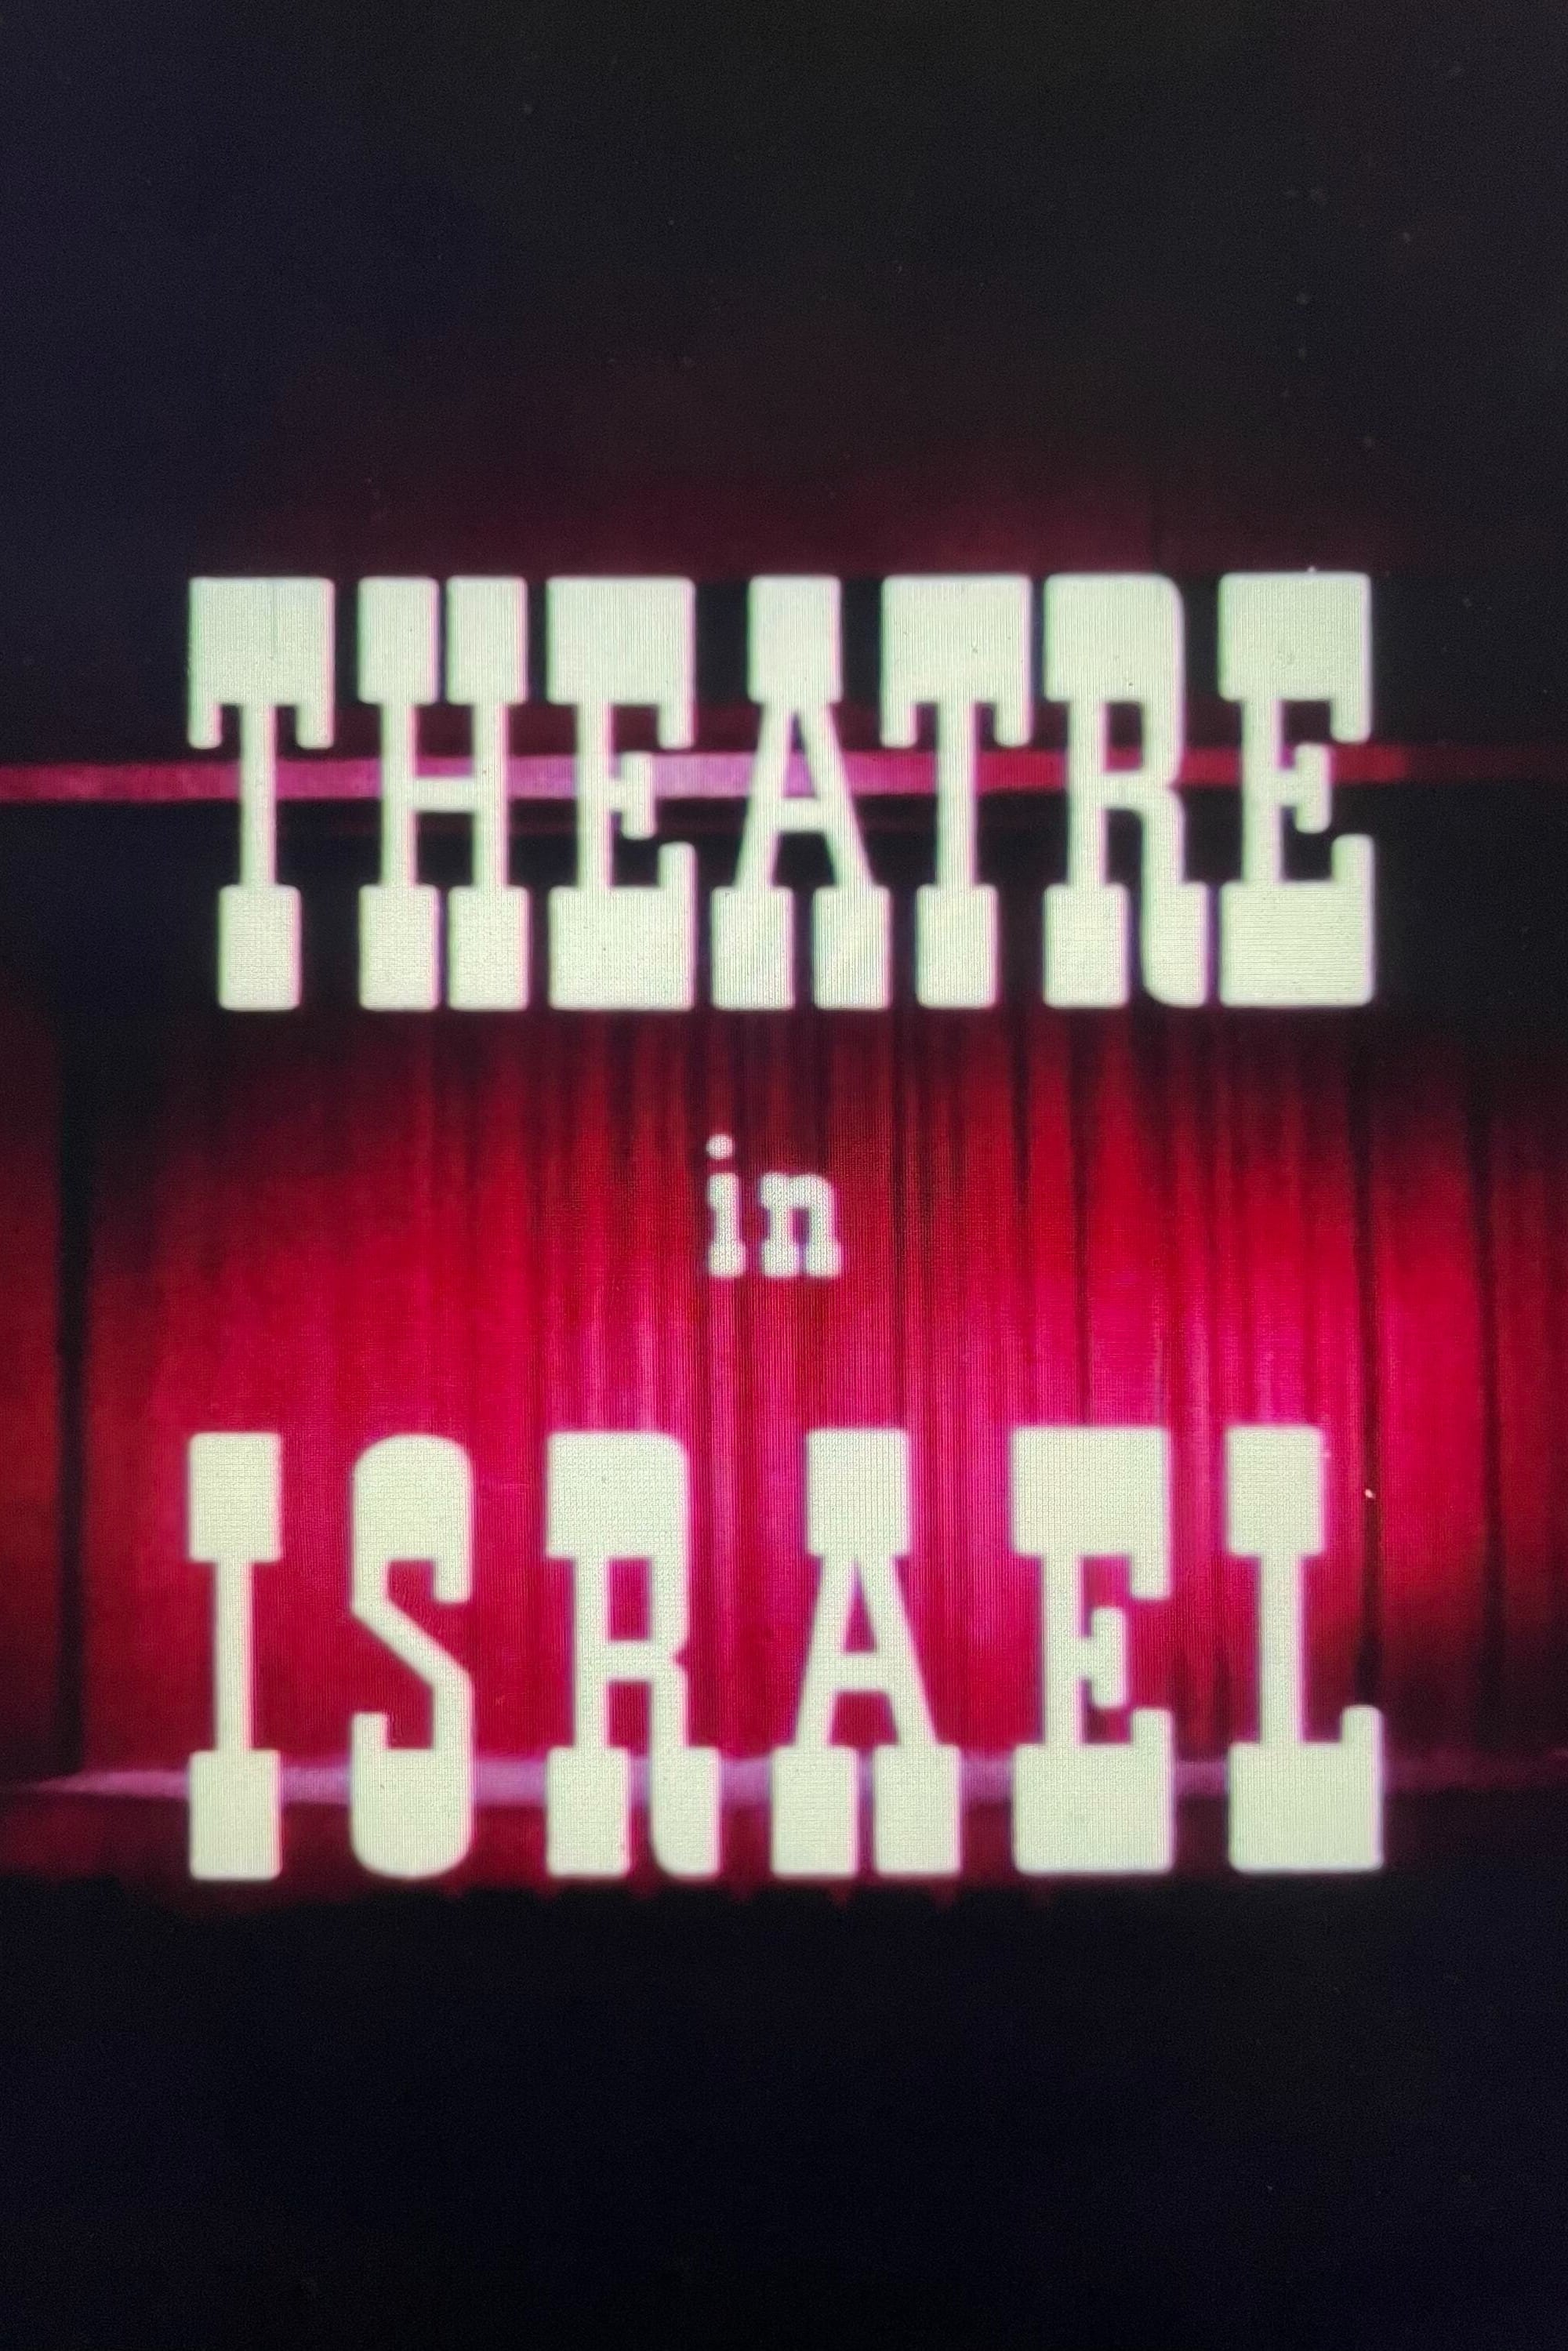 Theatre In Israel